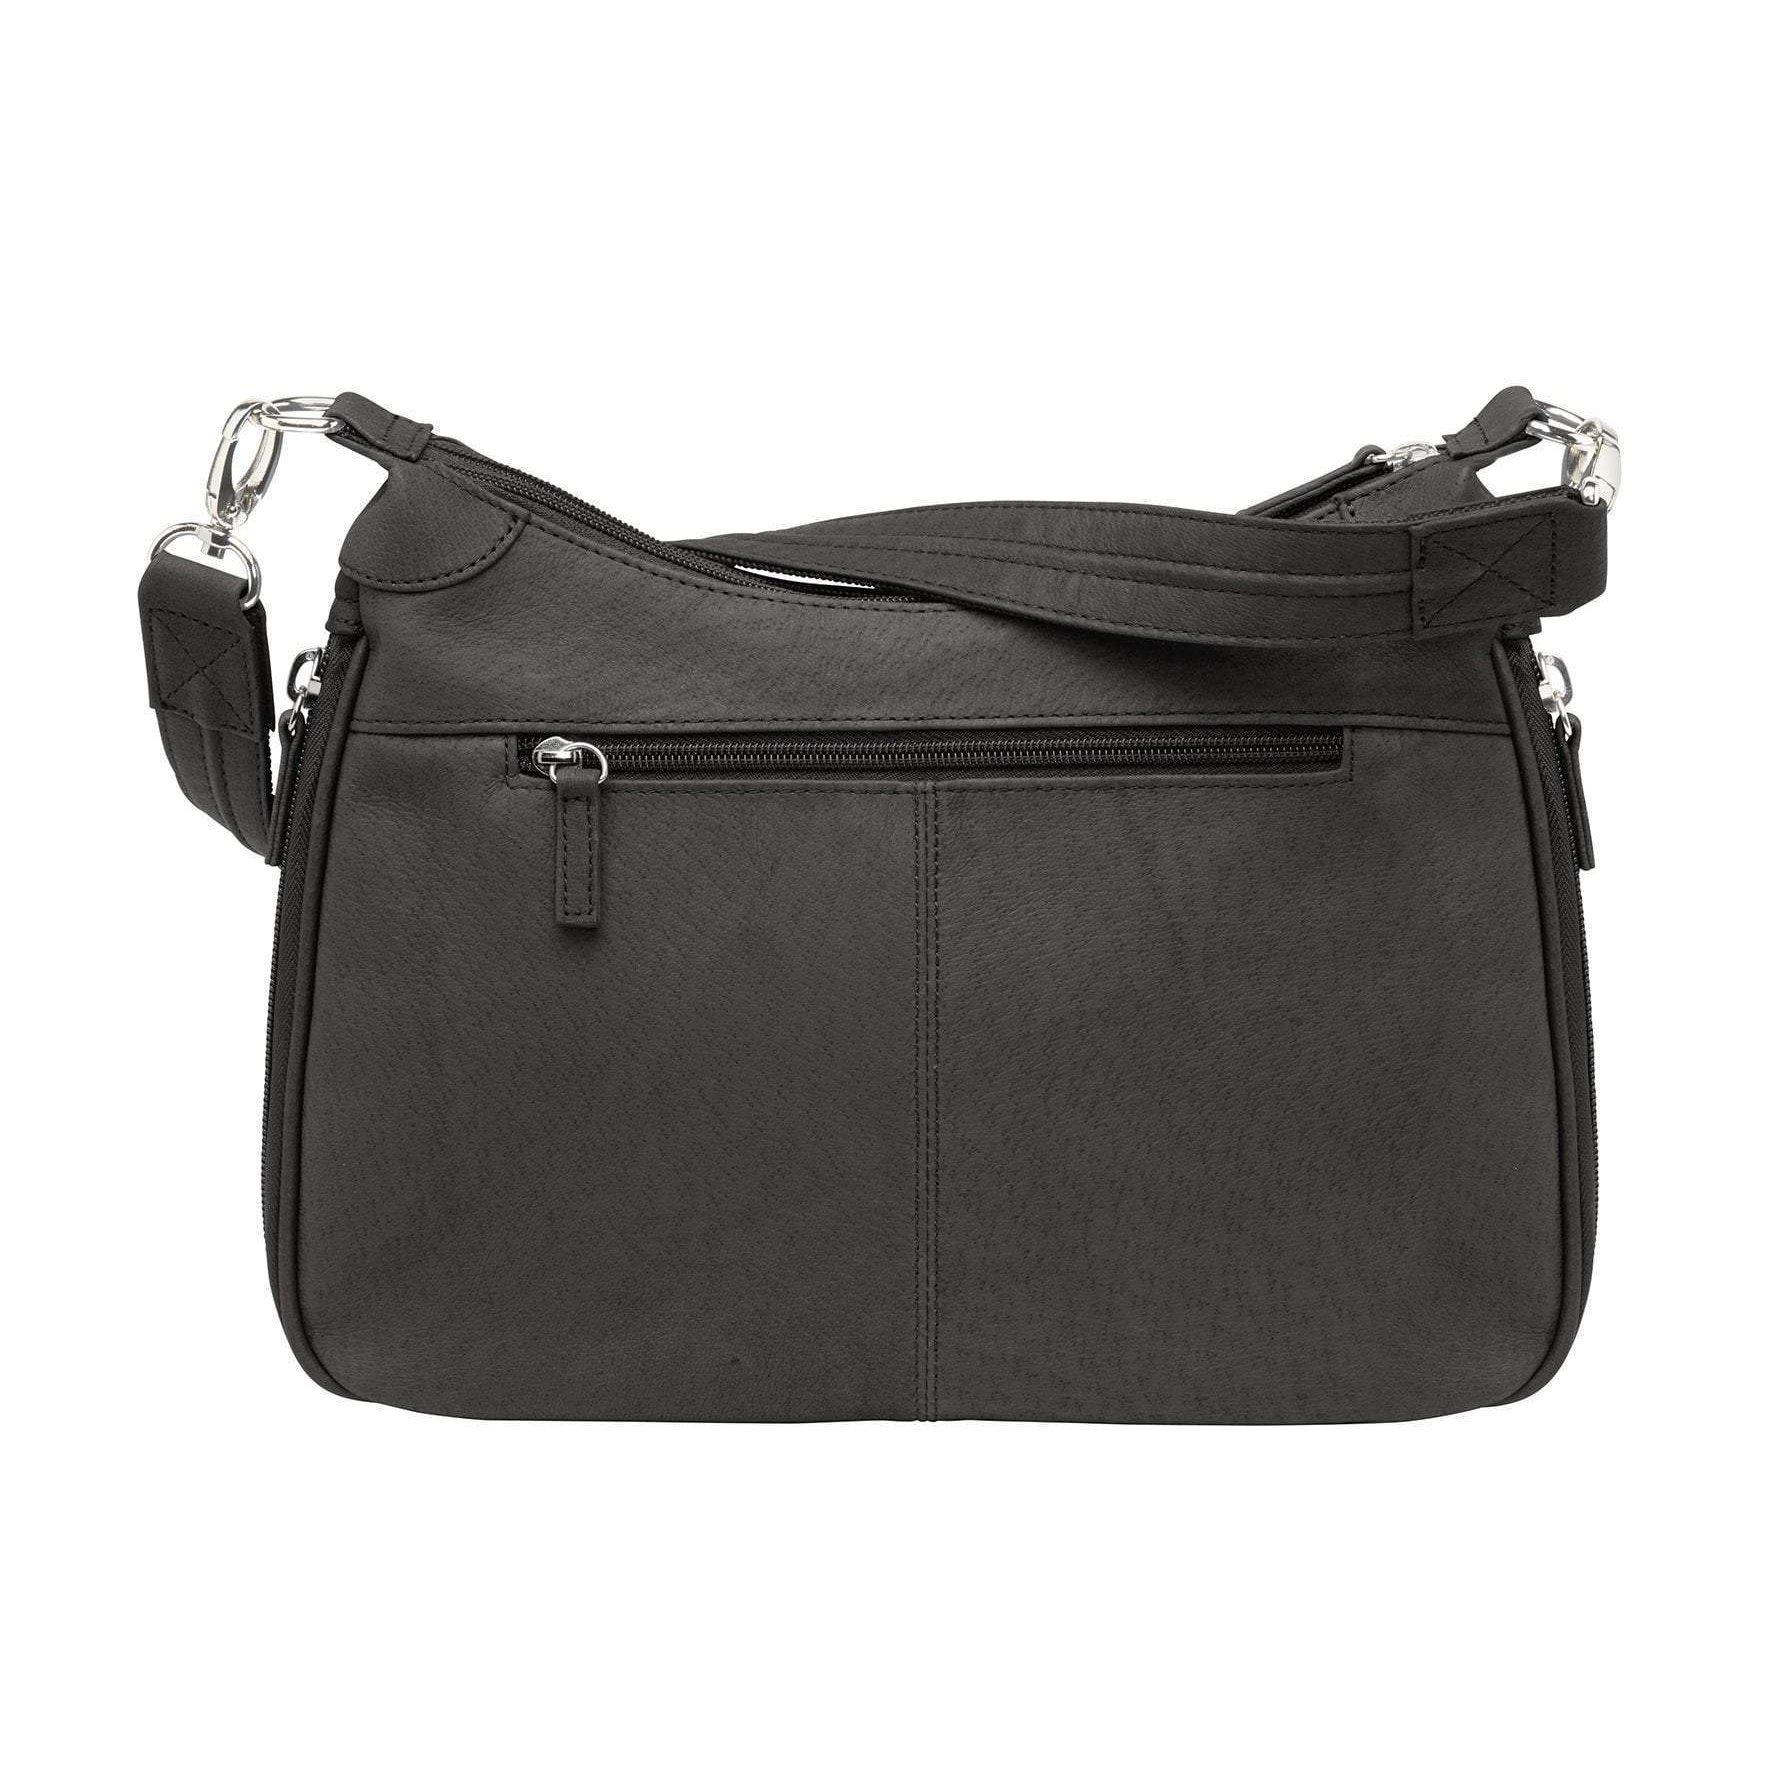 Ladies' Concealed-Carry Purse | GTM-70 Classic Hobo Bag| Gun Goddess ...